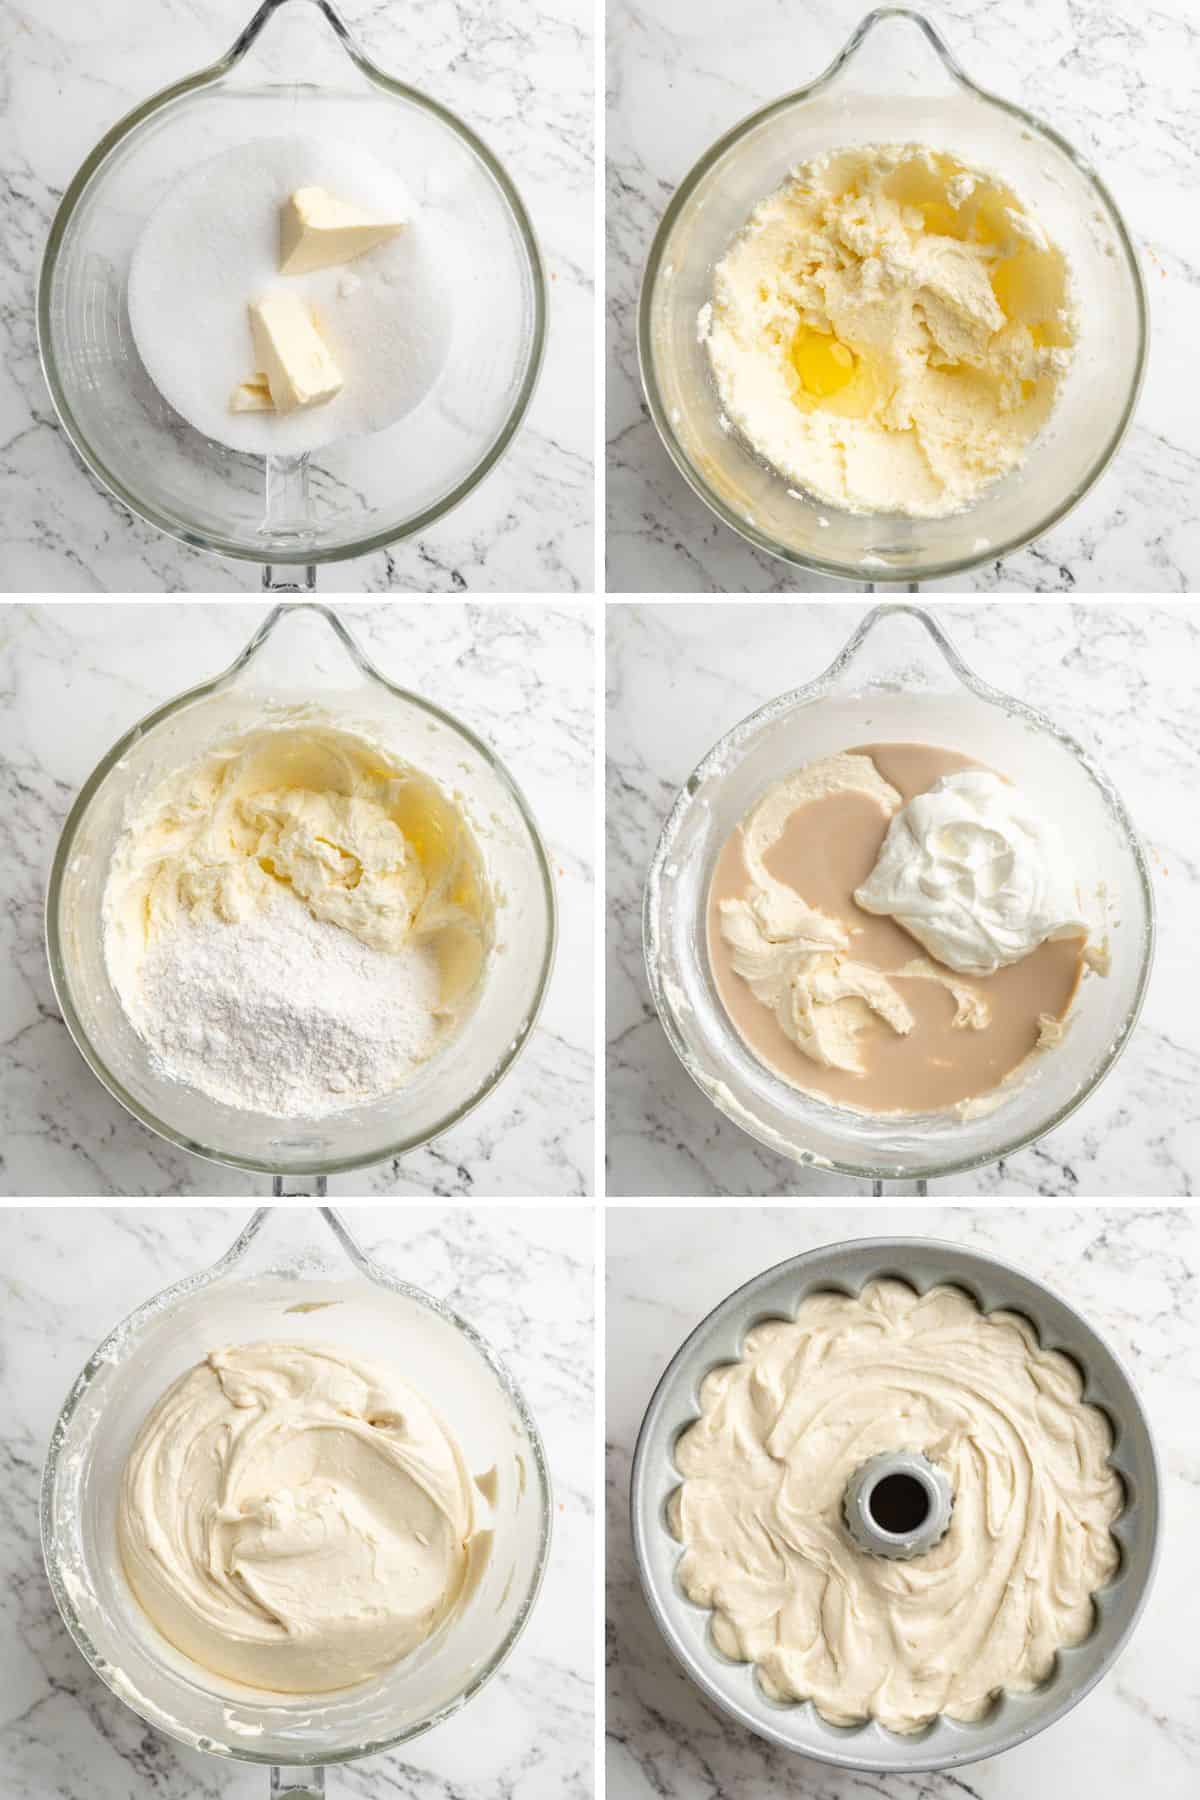 Collage of photos showing the steps to make the batter for the coconut pound cake